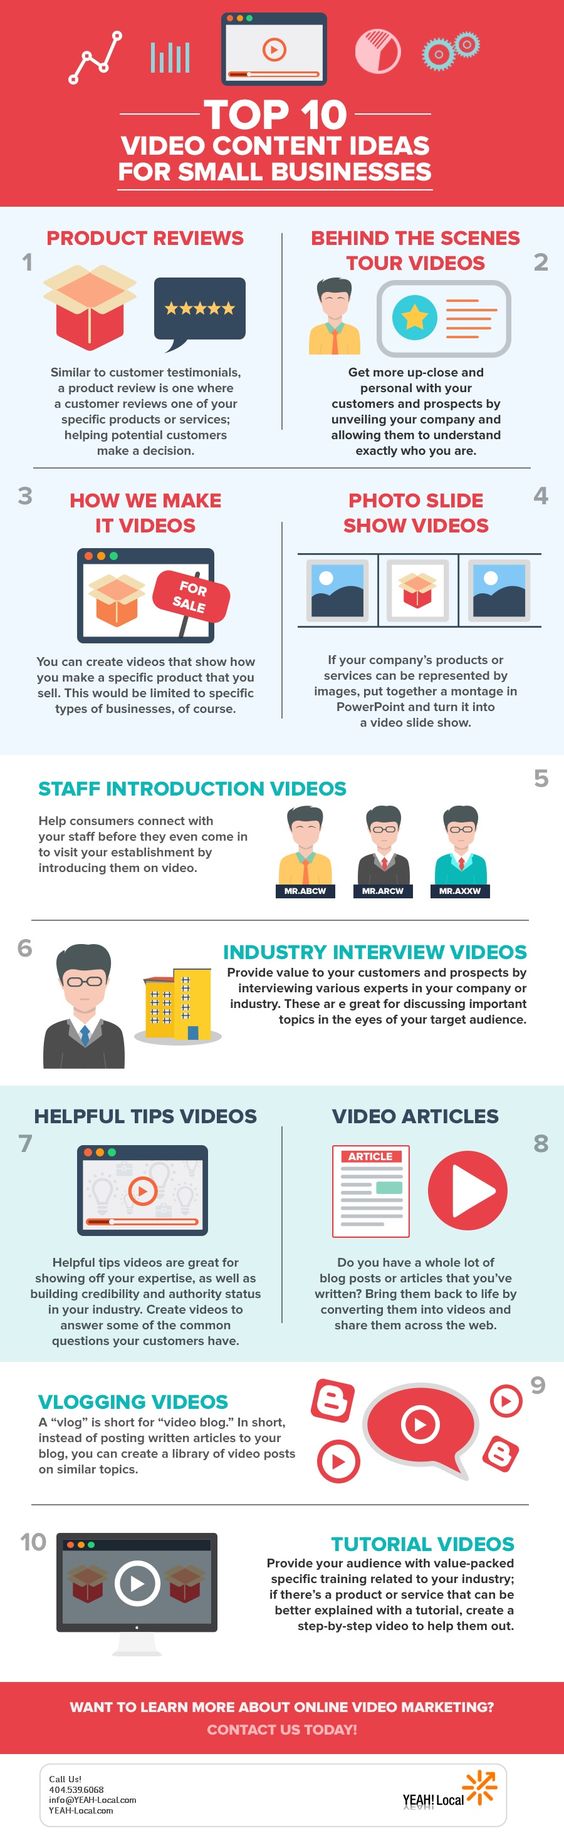 Top 10 Video Marketing Content Ideas for Small Businesses  Read more at: